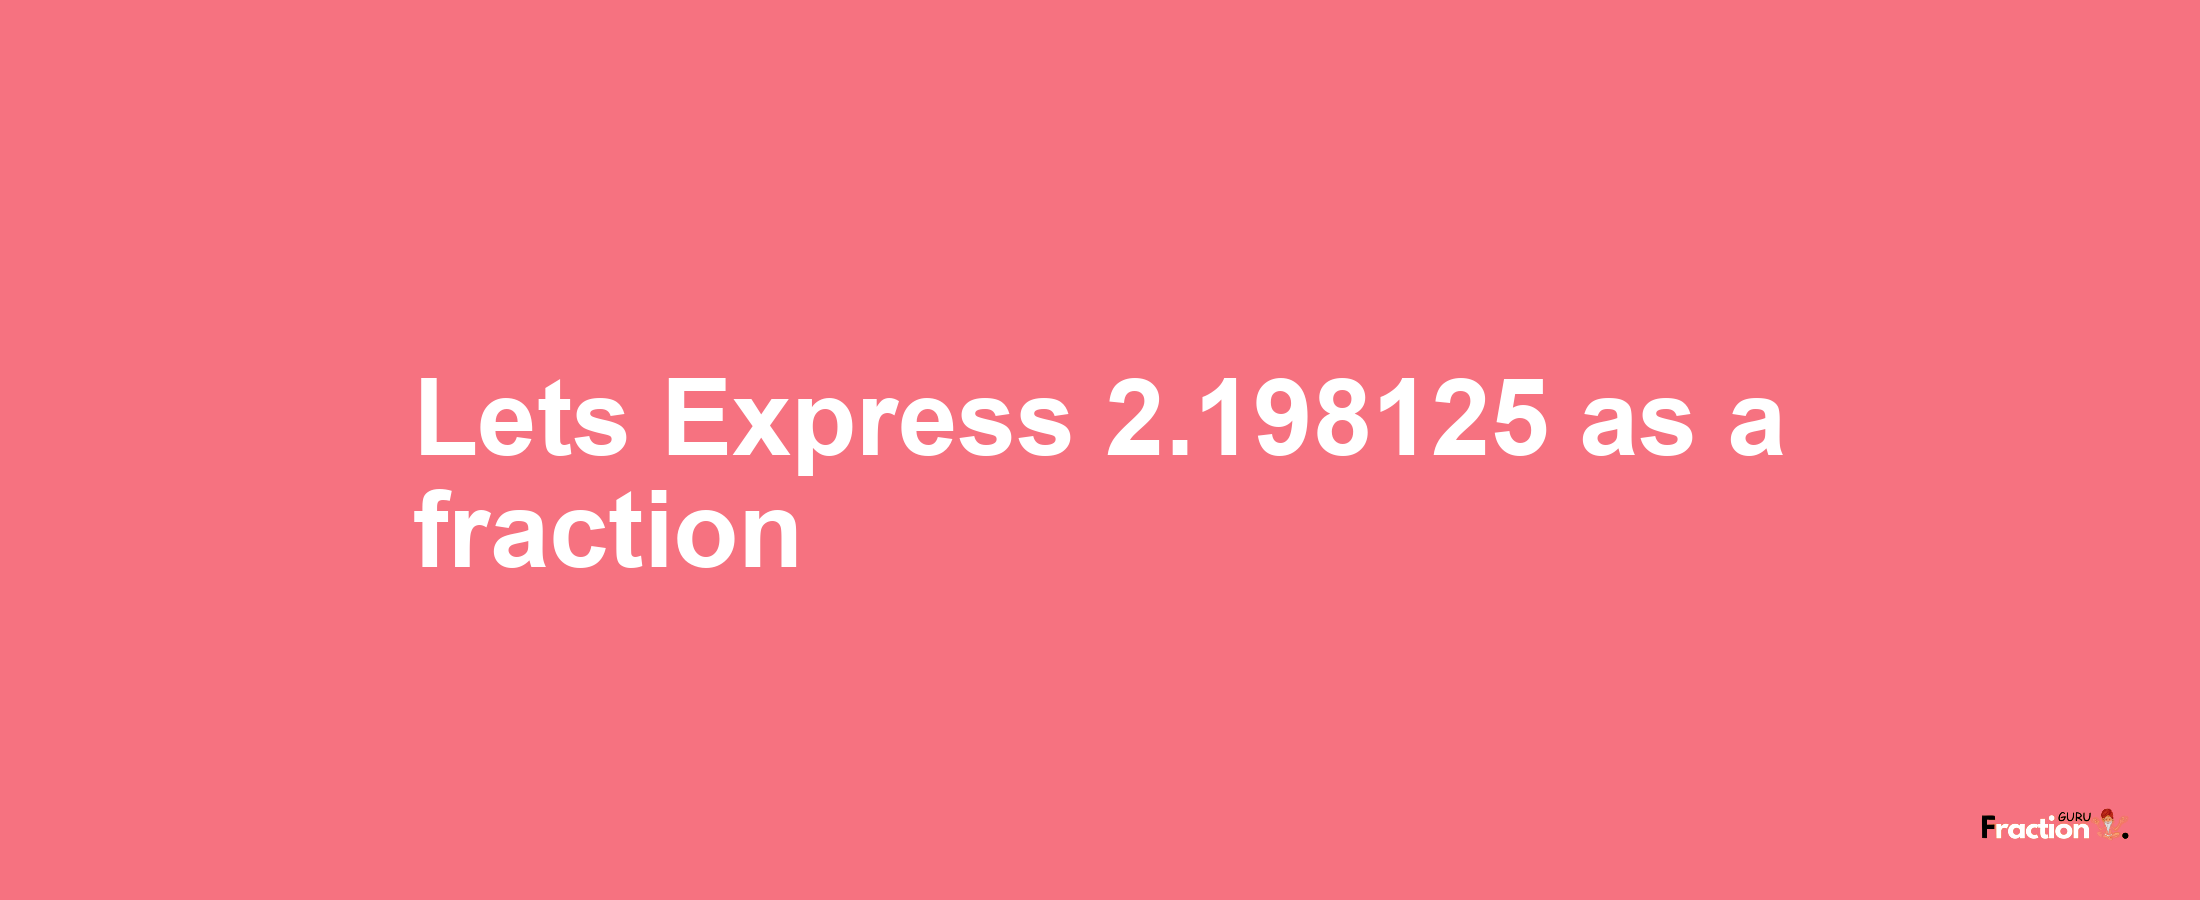 Lets Express 2.198125 as afraction